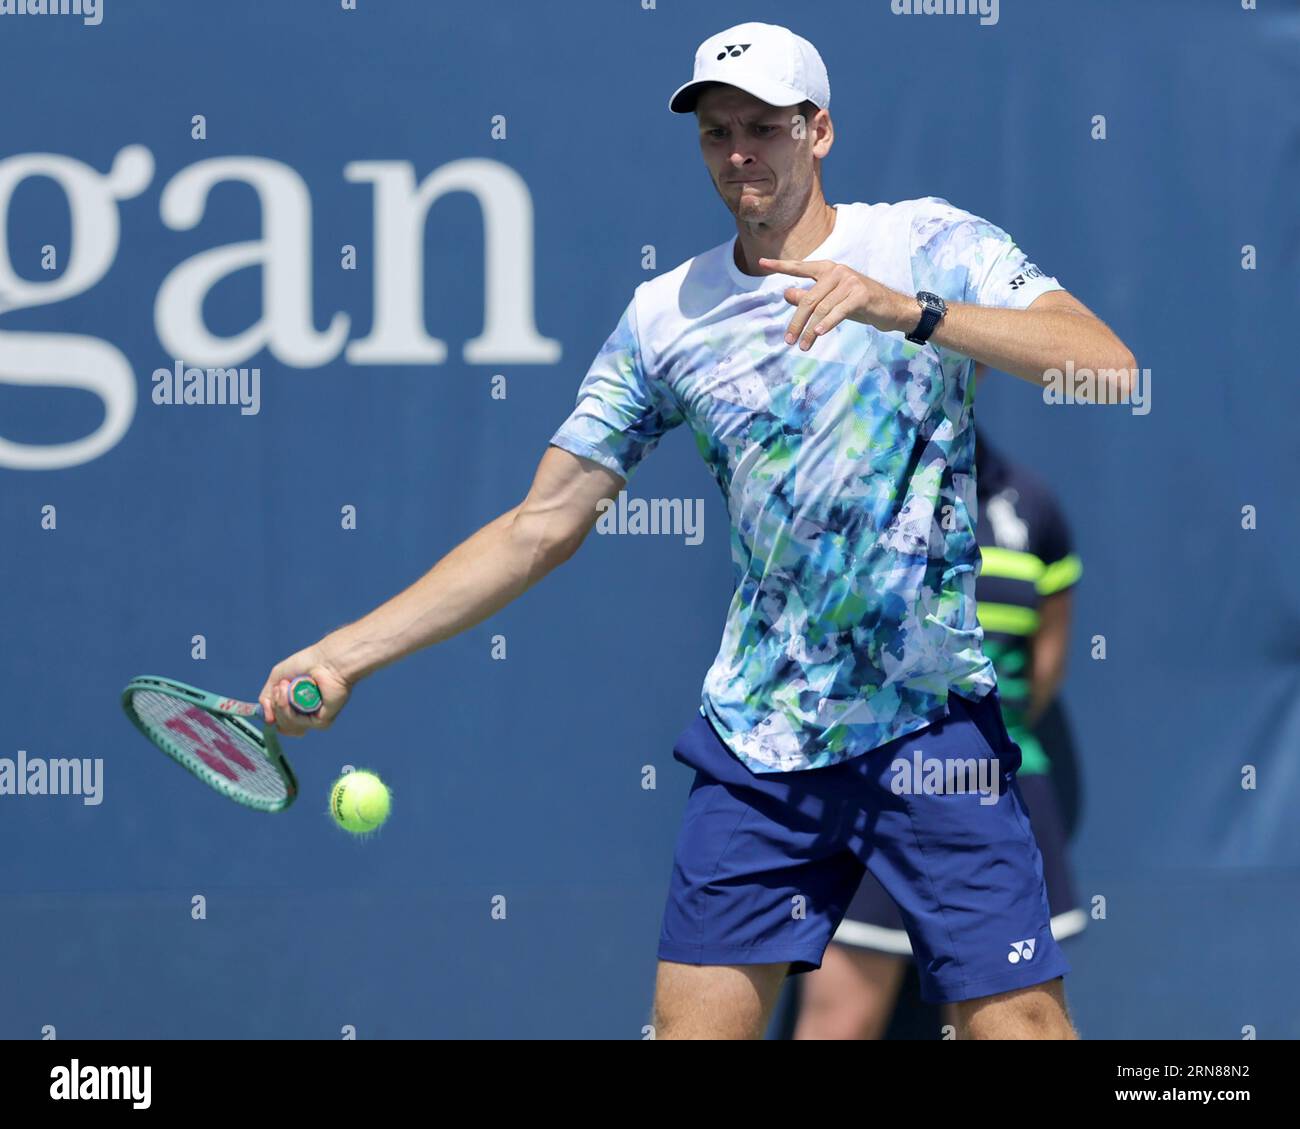 Hubert Hurkacz in action during a mens singles match at the 2023 US Open, Thursday, Aug